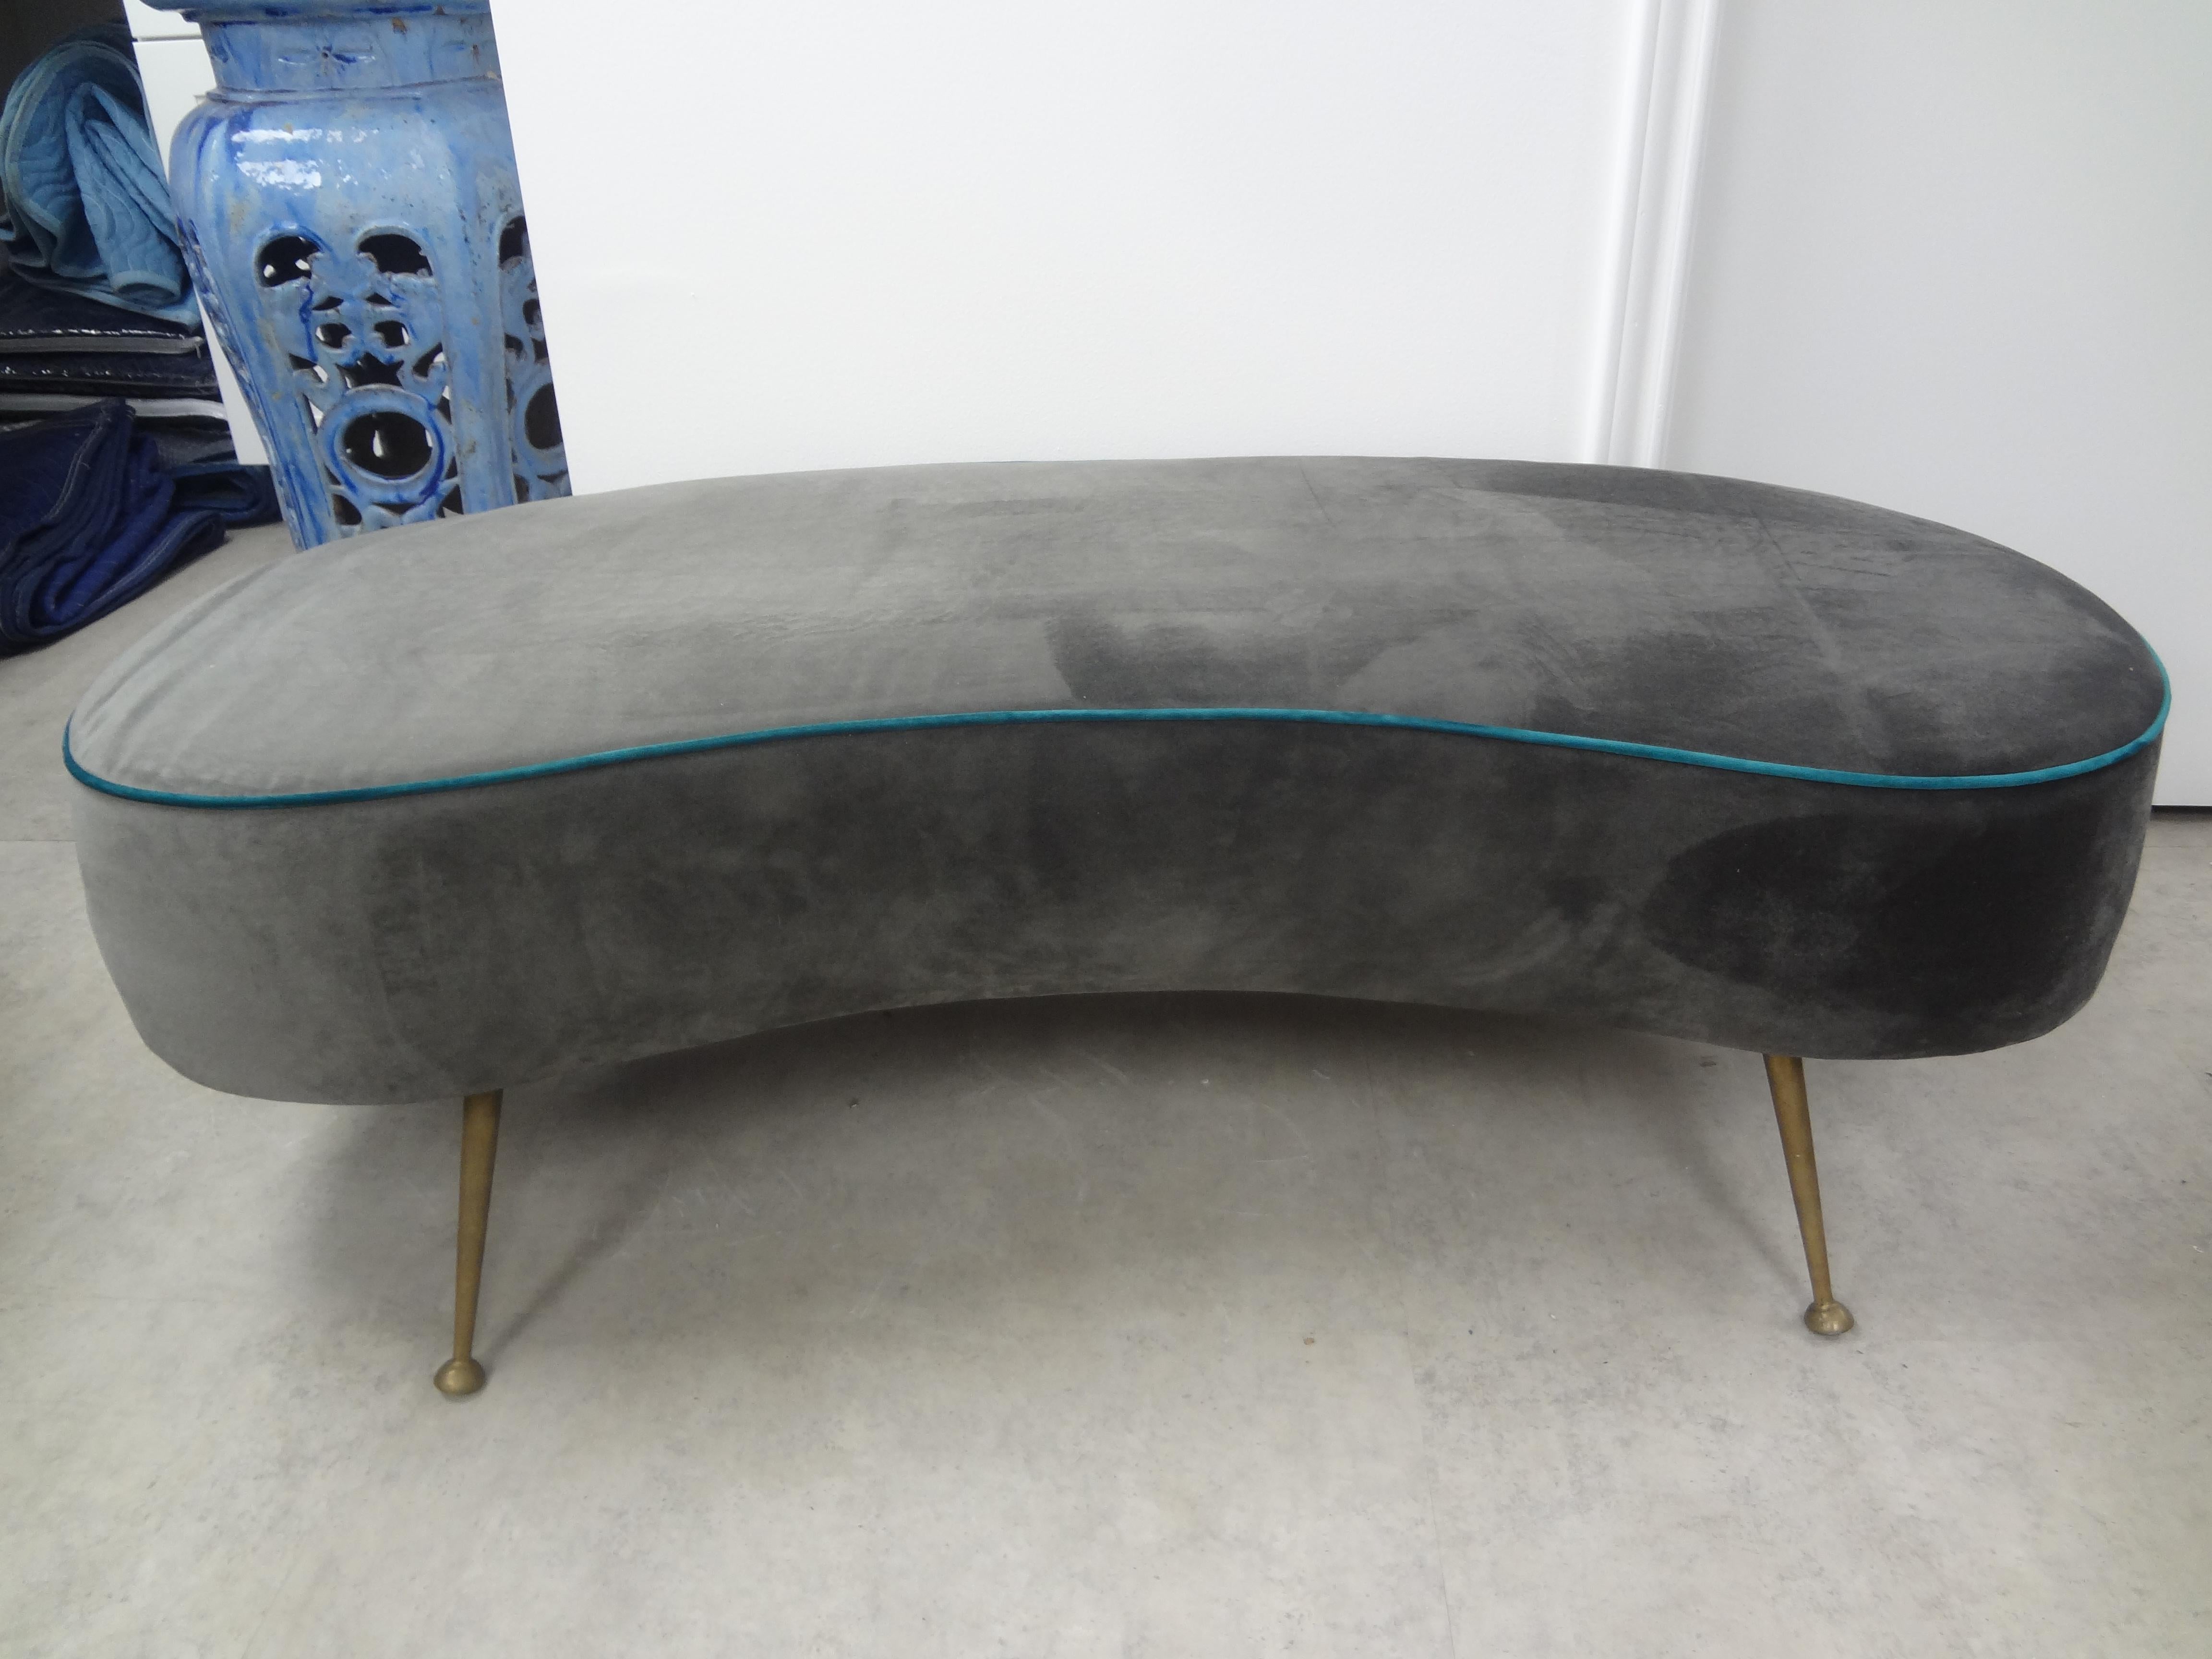 Large Italian Gio Ponti style curved bench with brass legs.
Large Italian curved bench with splayed brass legs. This stunning Italian modern Gio Ponti inspired bench is upholstered in grey velvet with turquoise piping. Easy to re-upholster in the